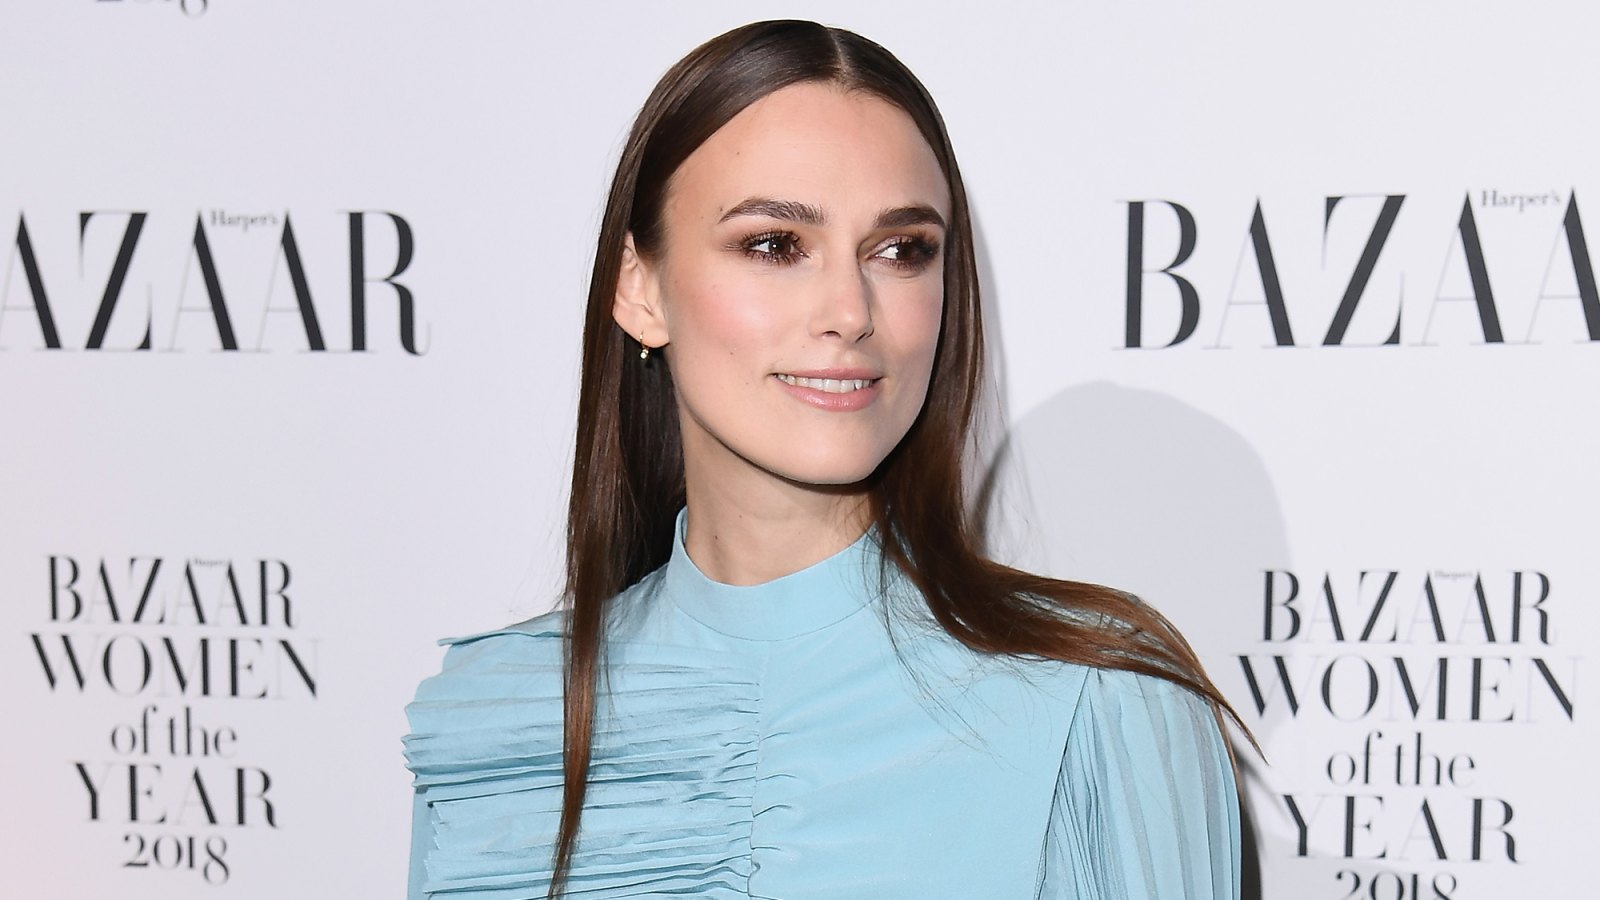 Keira Knightley Doesn’t Remember Who Her ‘Love Actually’ Character Ends Up With